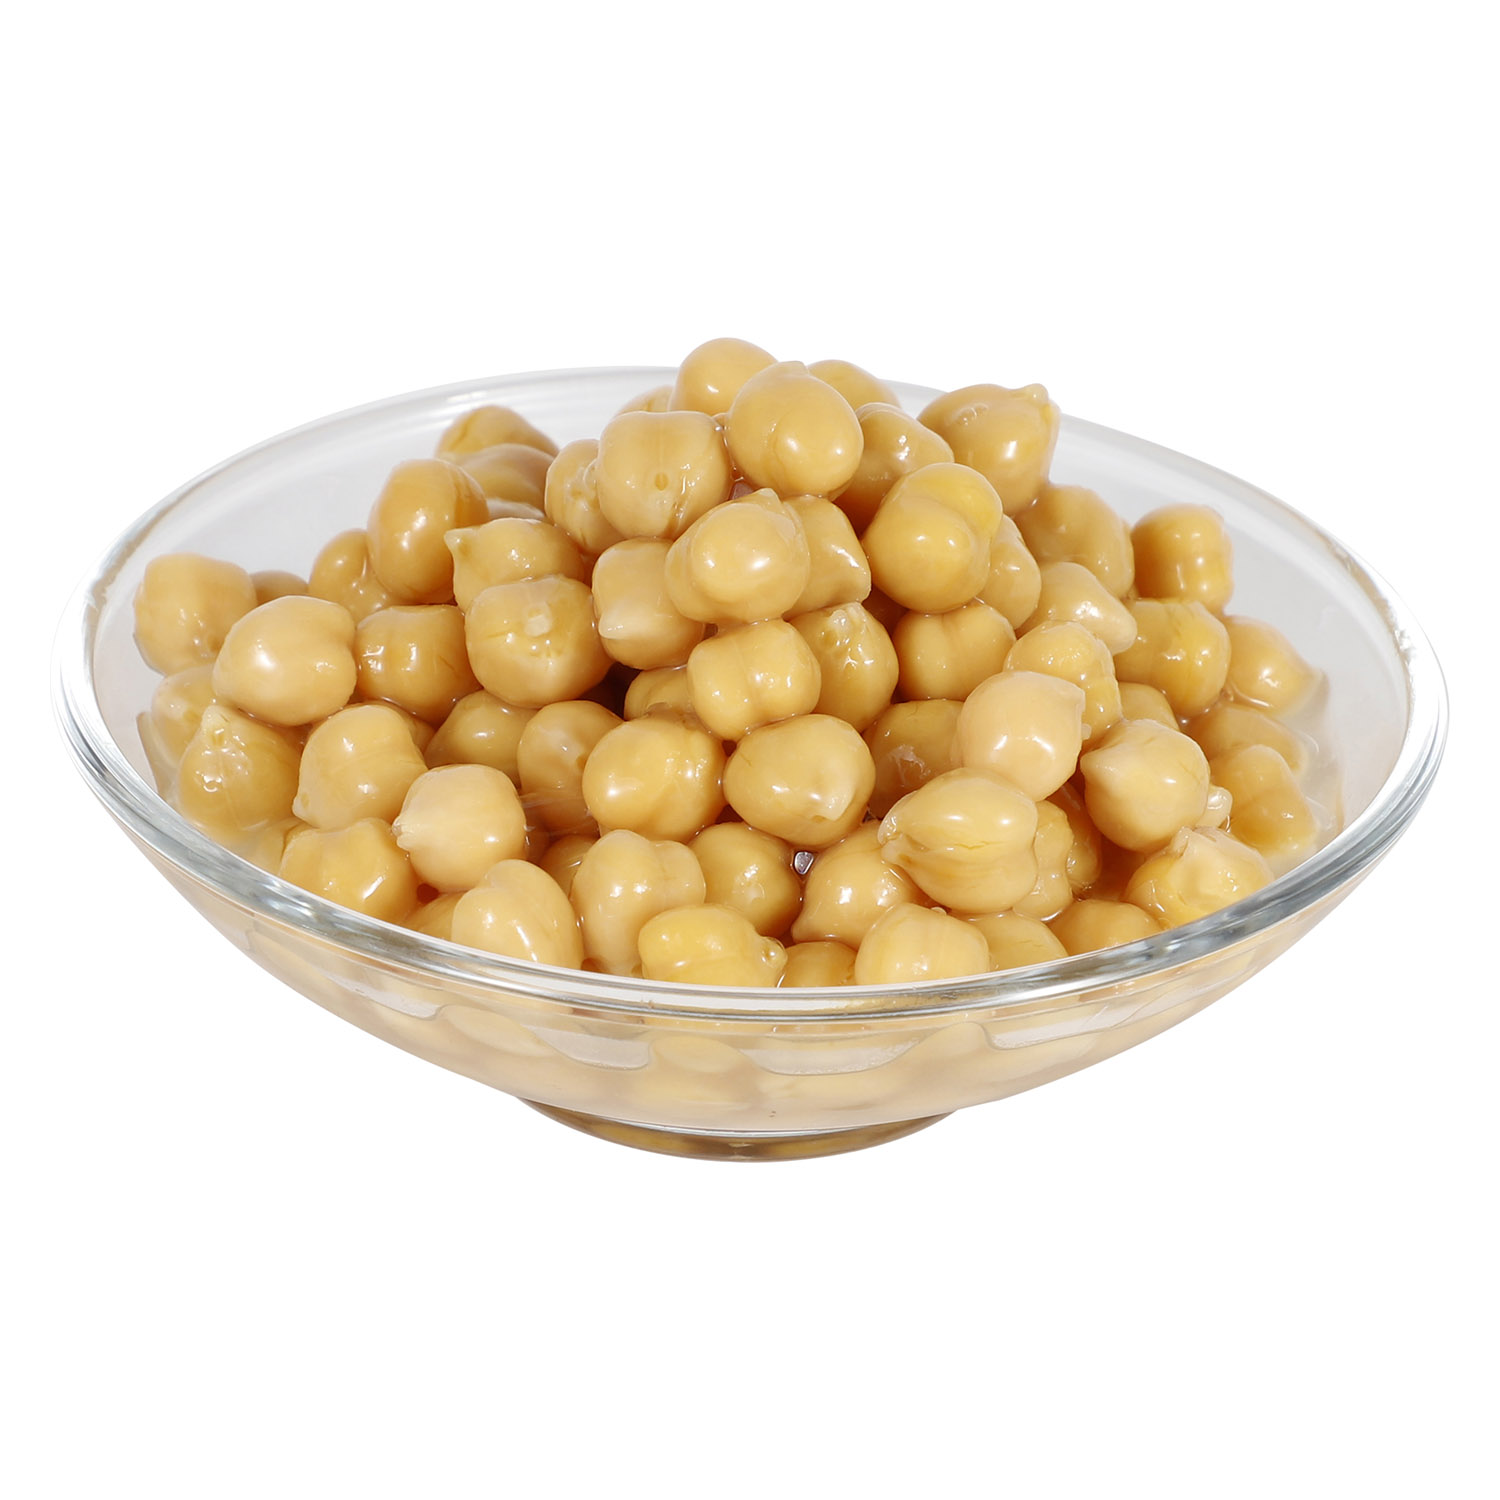 Canned chick peas in brine